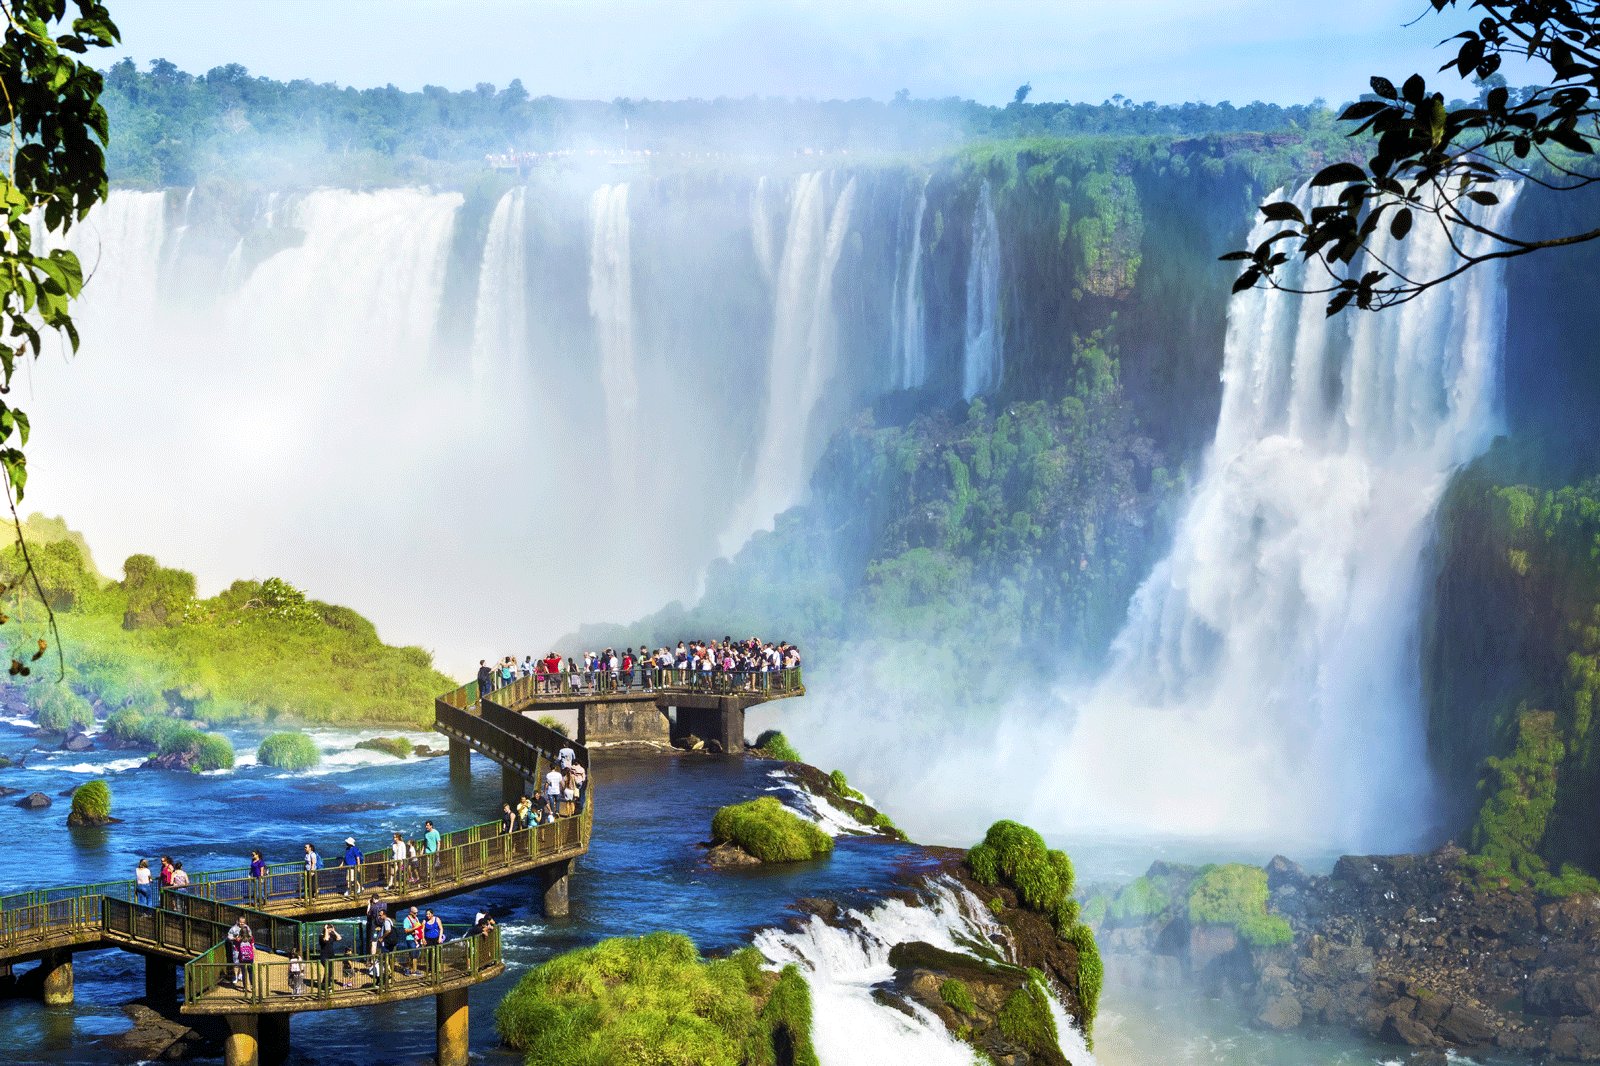 How to look into the Devil's Throat in Iguazu